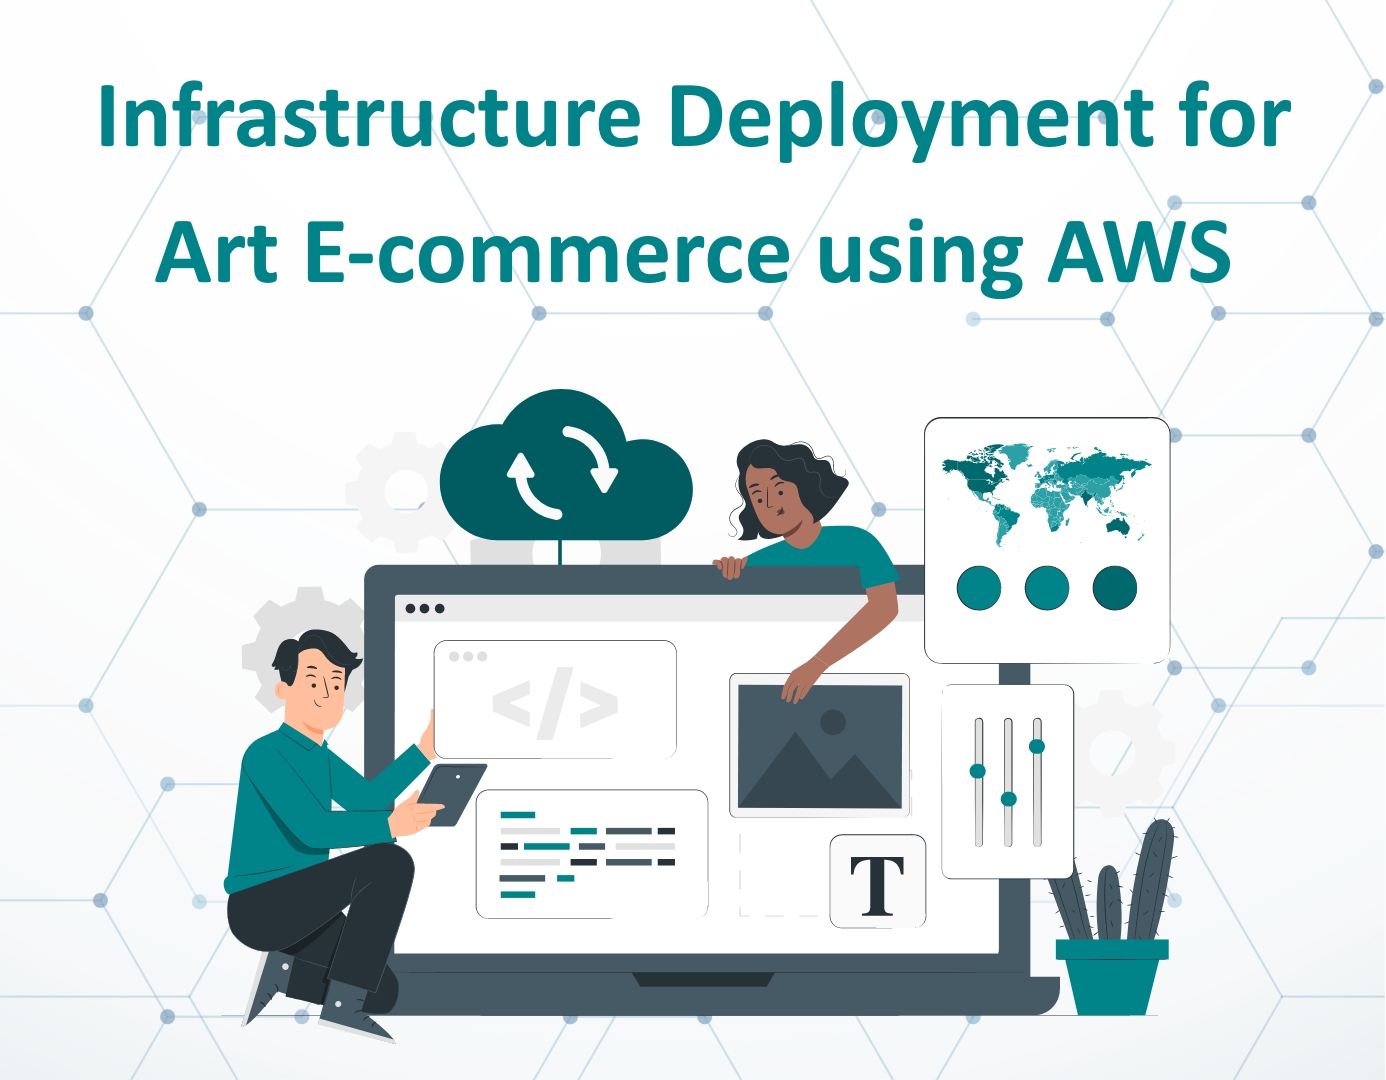 A cloud computing infrastructure on AWS for efficient and secure art e-commerce, enabling seamless transactions and enhanced user experience